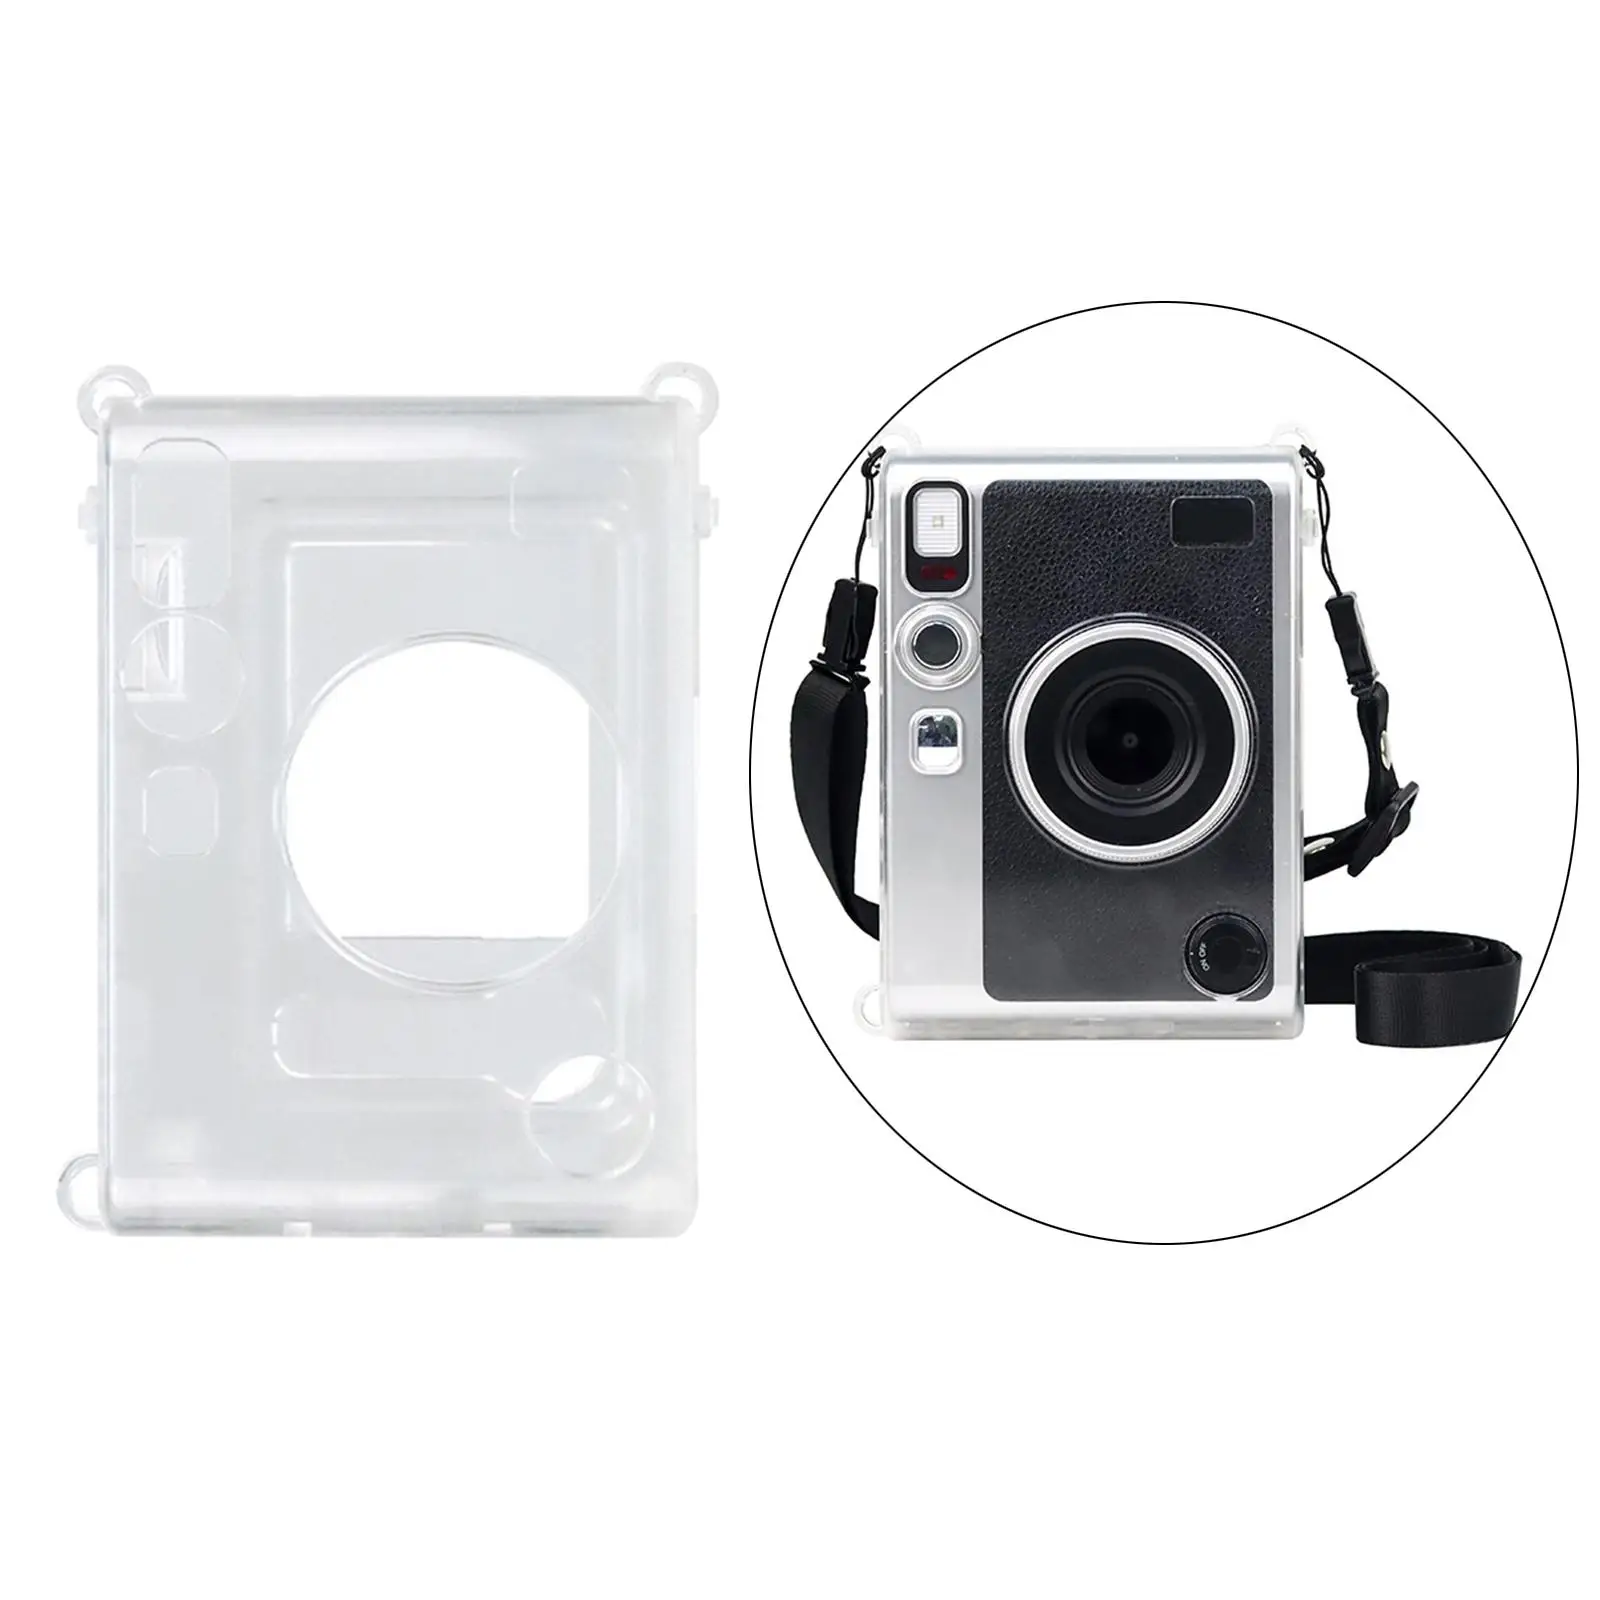  Protective Shell Accessories ,Supplies ,PVC,  Stabilization ,Storage Case Cover for  Cameras ,Holiday Travel